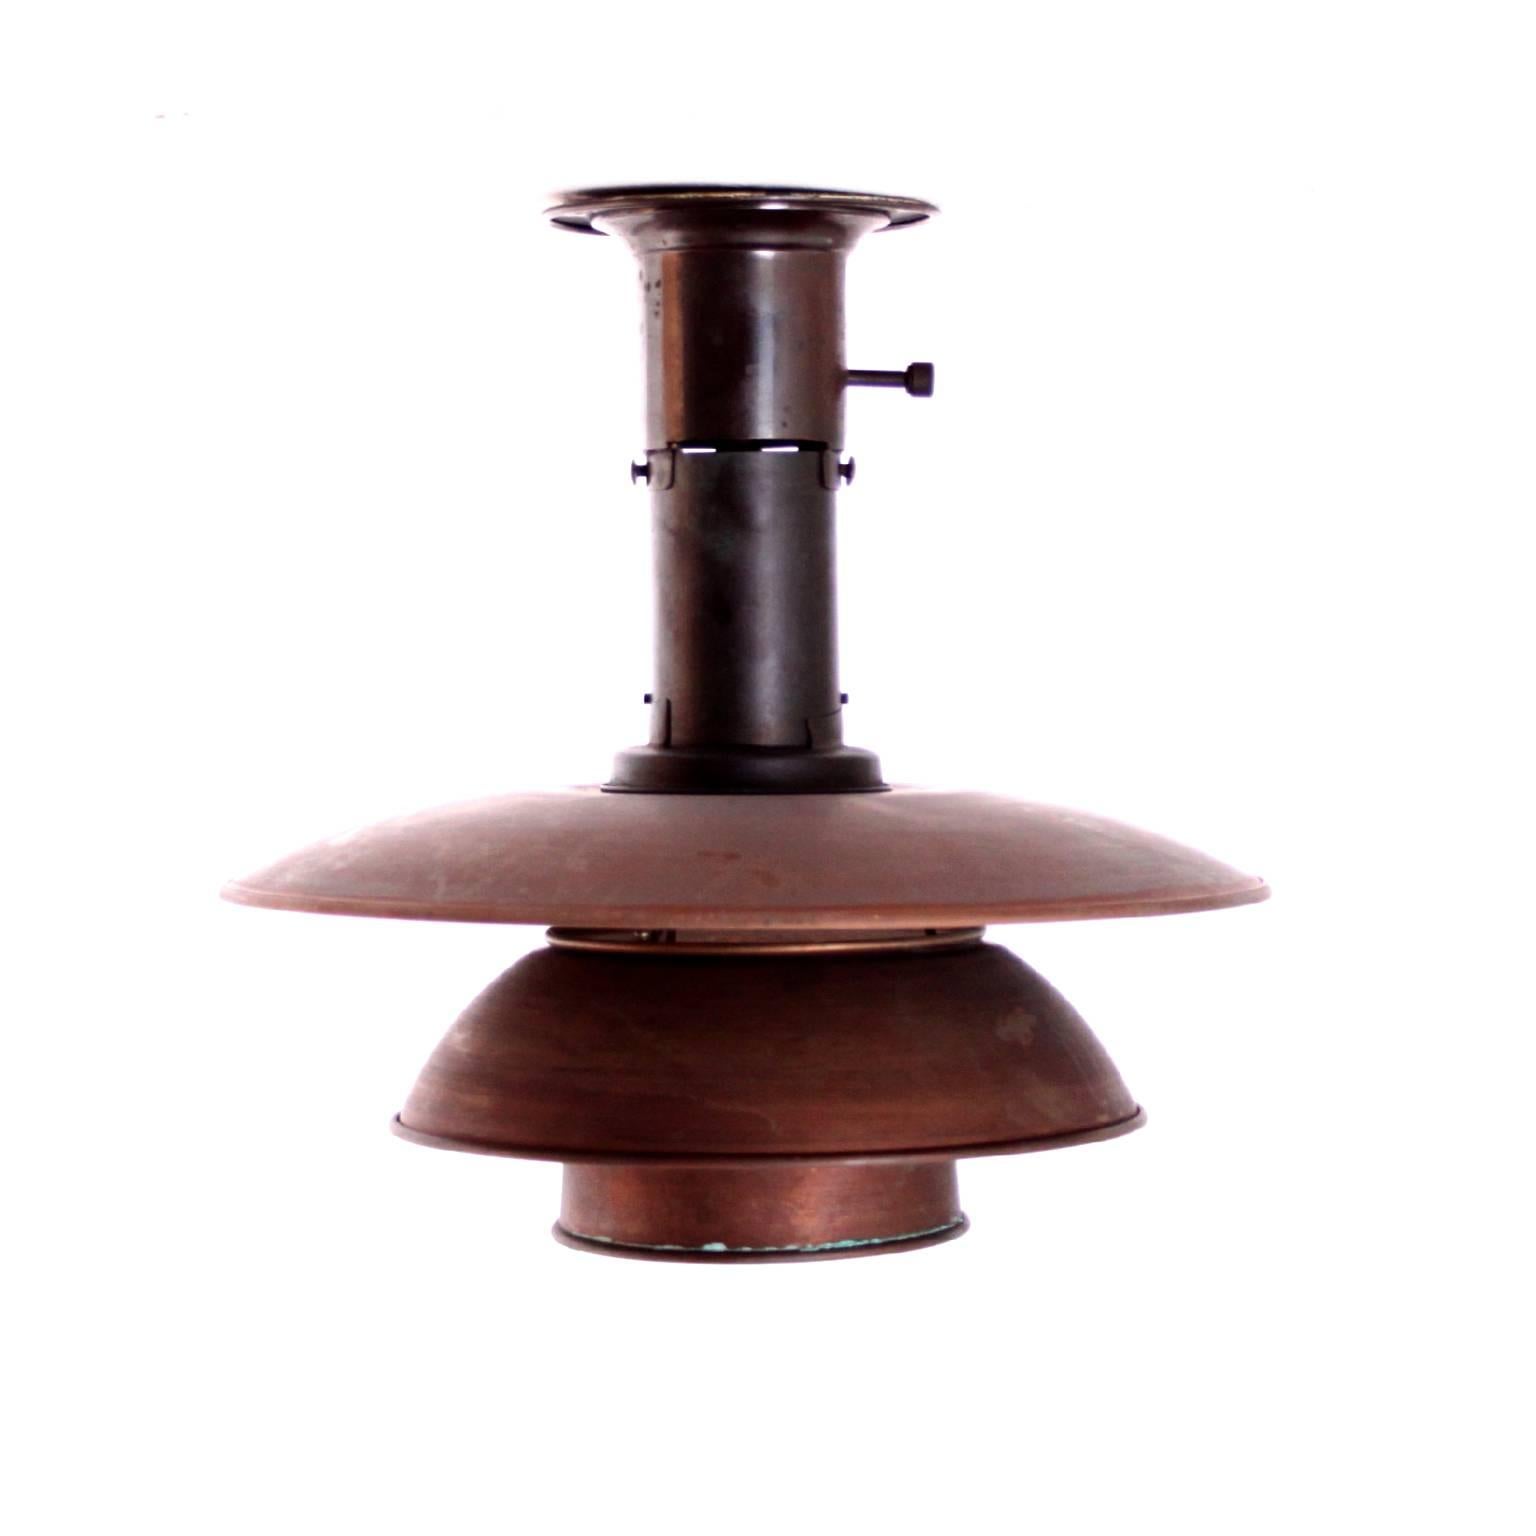 Danish Early Poul Henningsen Ceiling Light  ( PH 3/3 ) in Patinated Copper 1930s